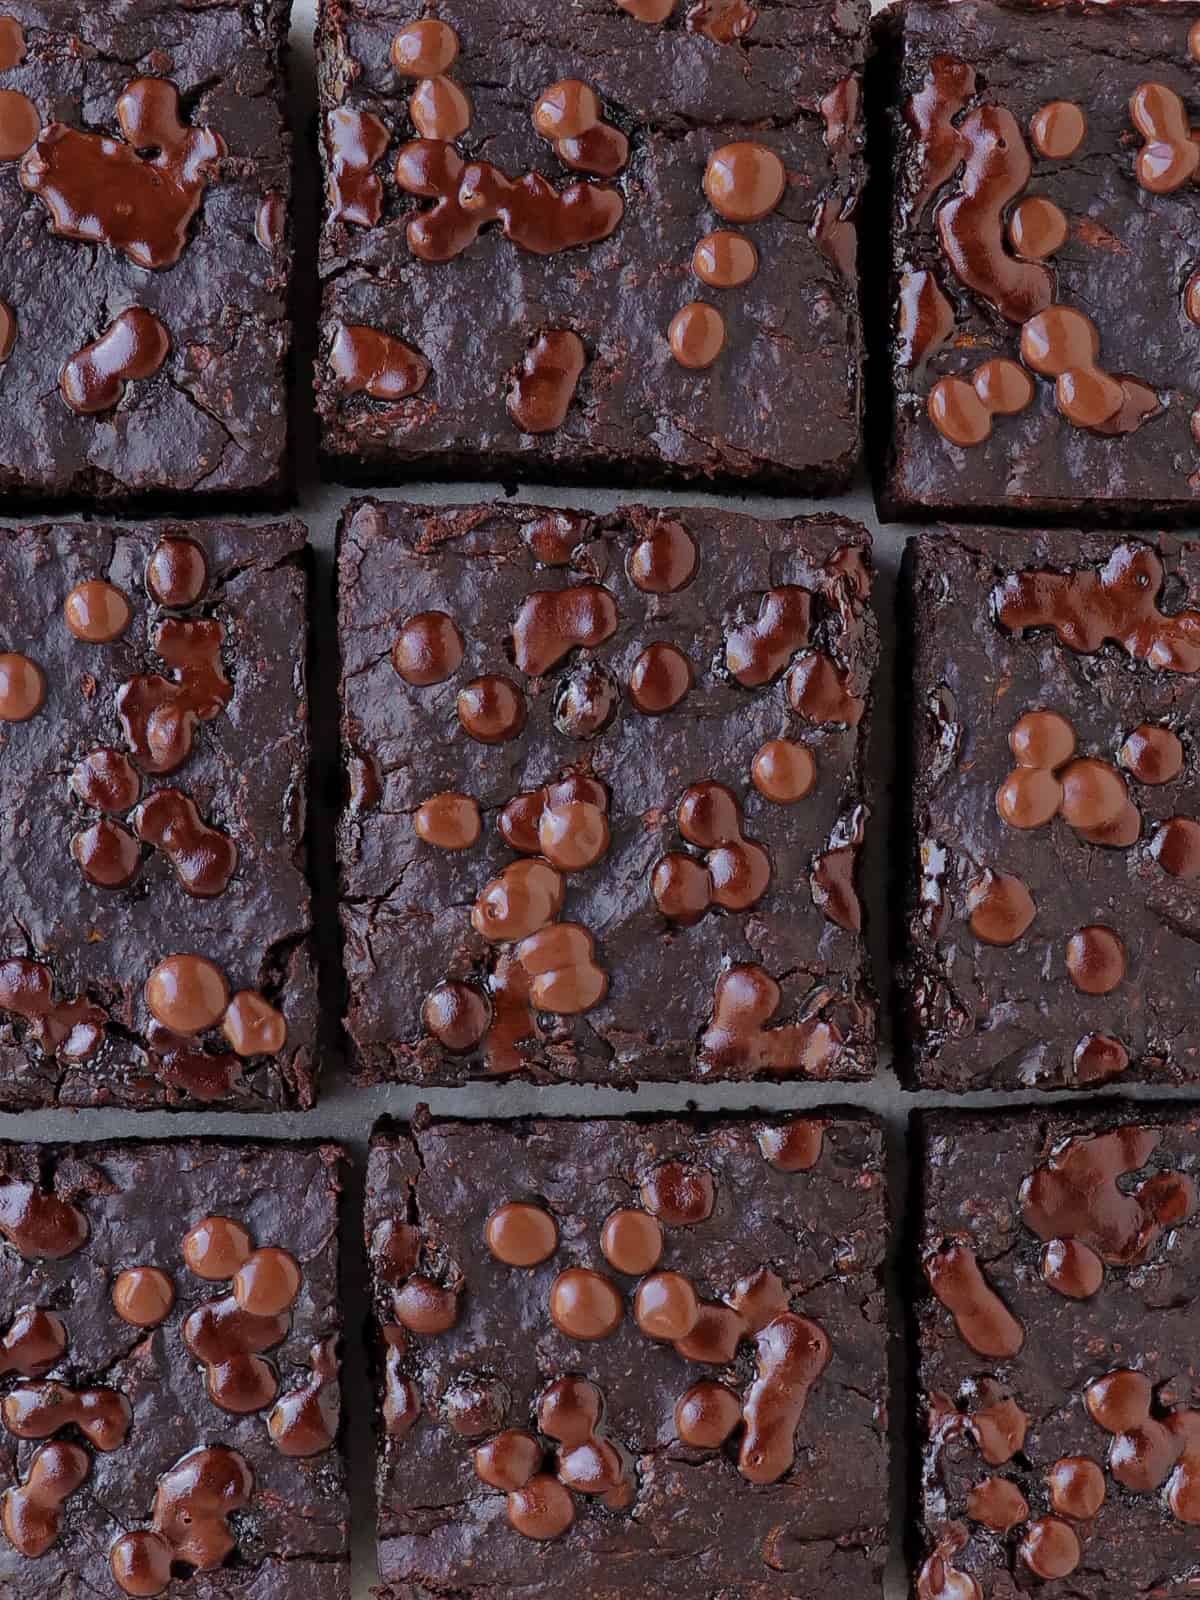 Close up shot of the brownies.